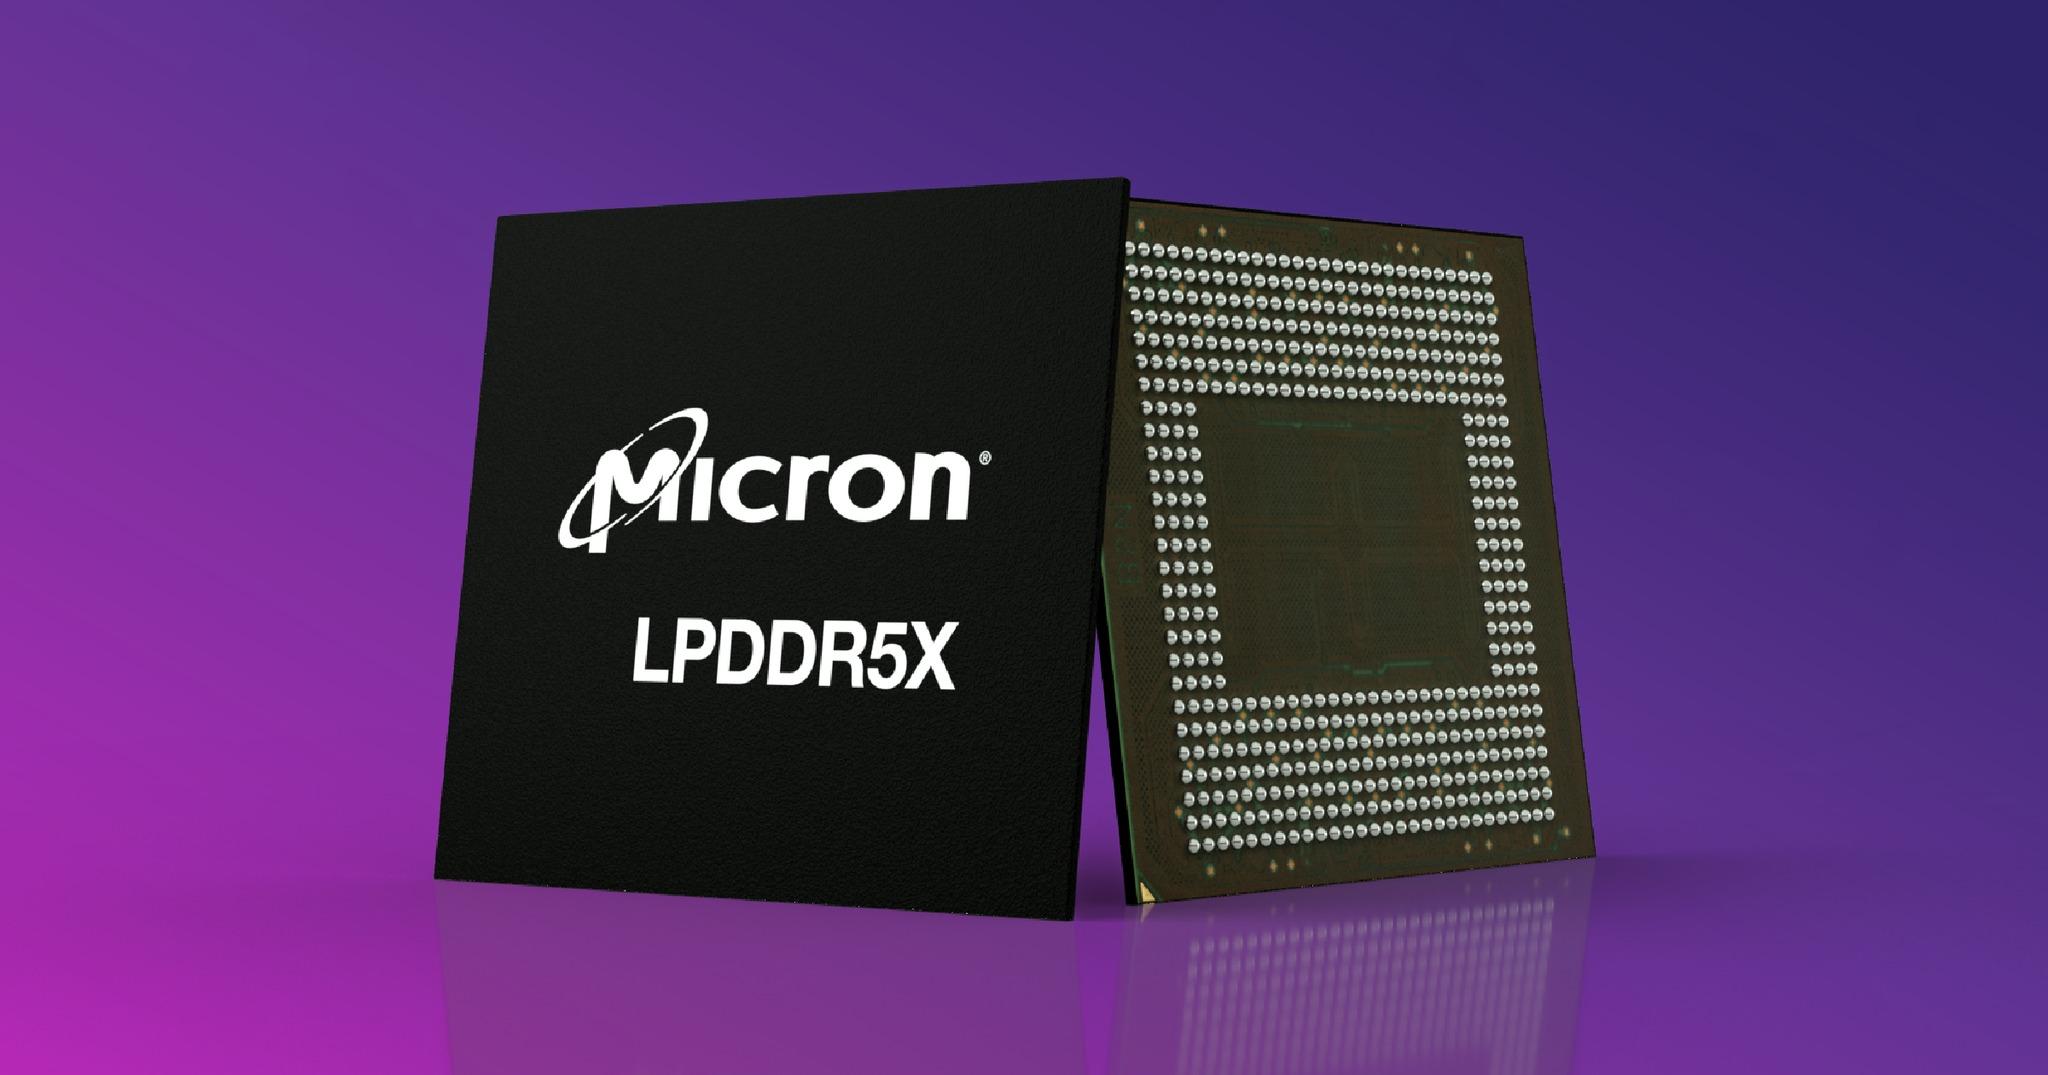 Black Micron semiconductor chip on purple background